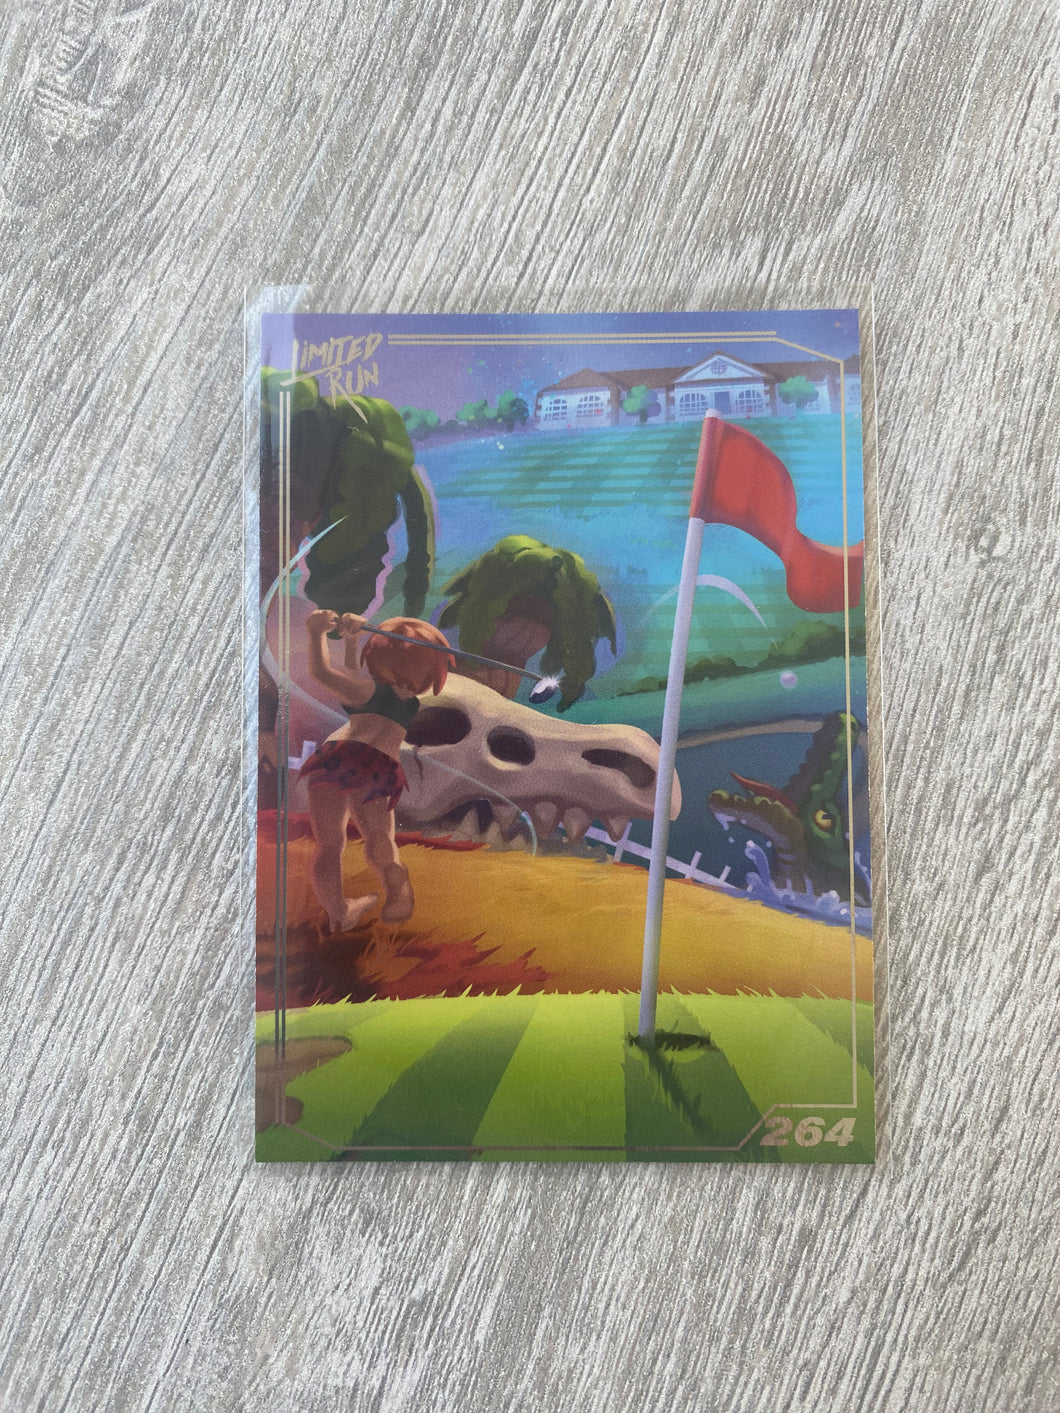 Gen1 #264 silver Golf story Limited run games Trading card